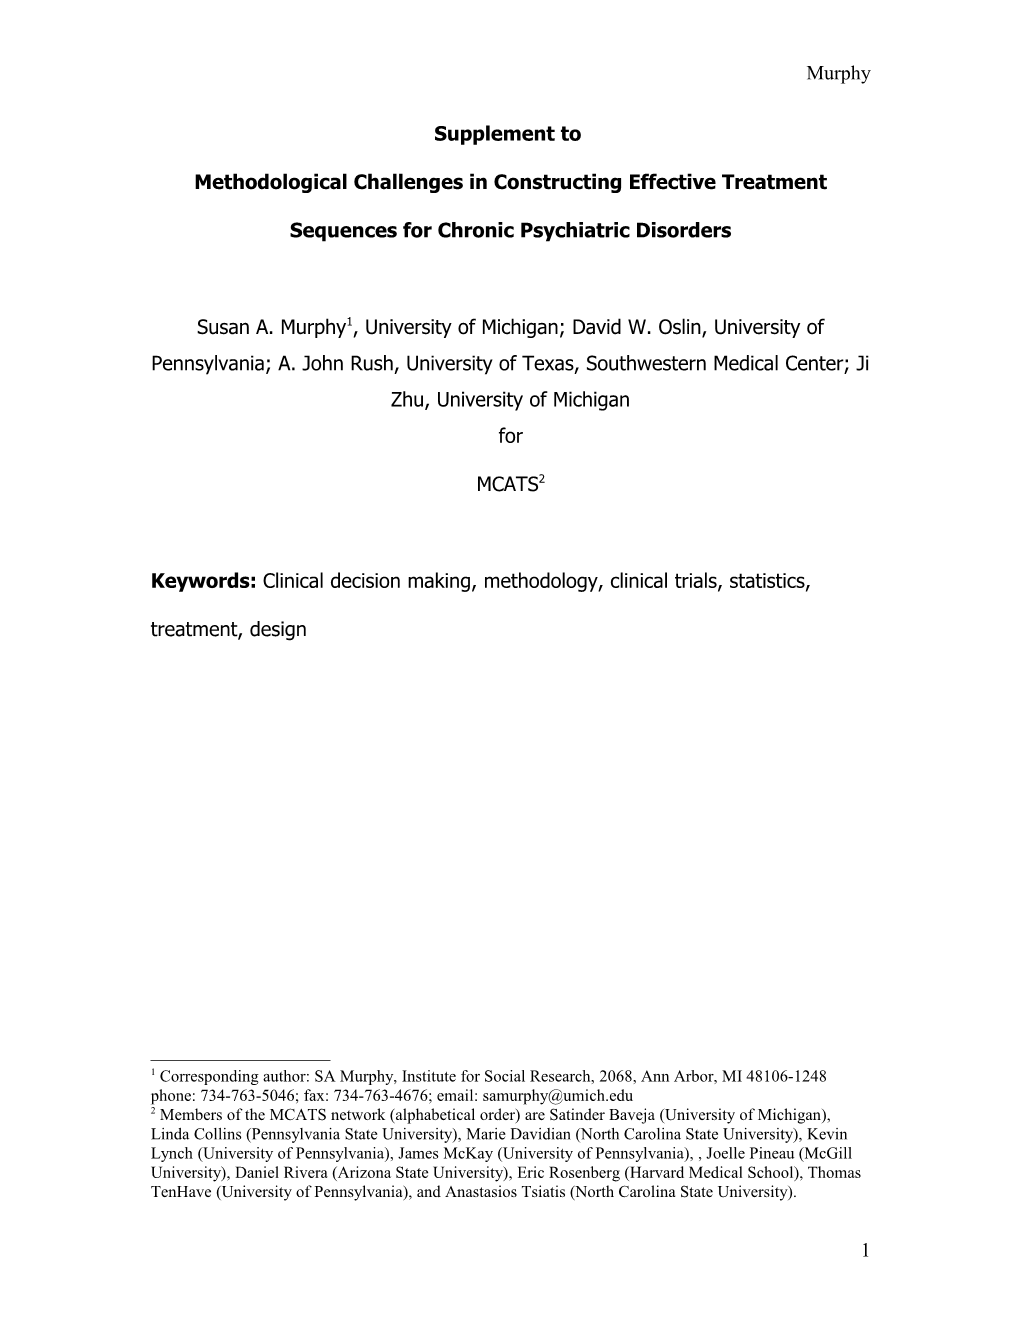 Supplement to Methodological Challenges in Constructing Effective Treatment Sequences For